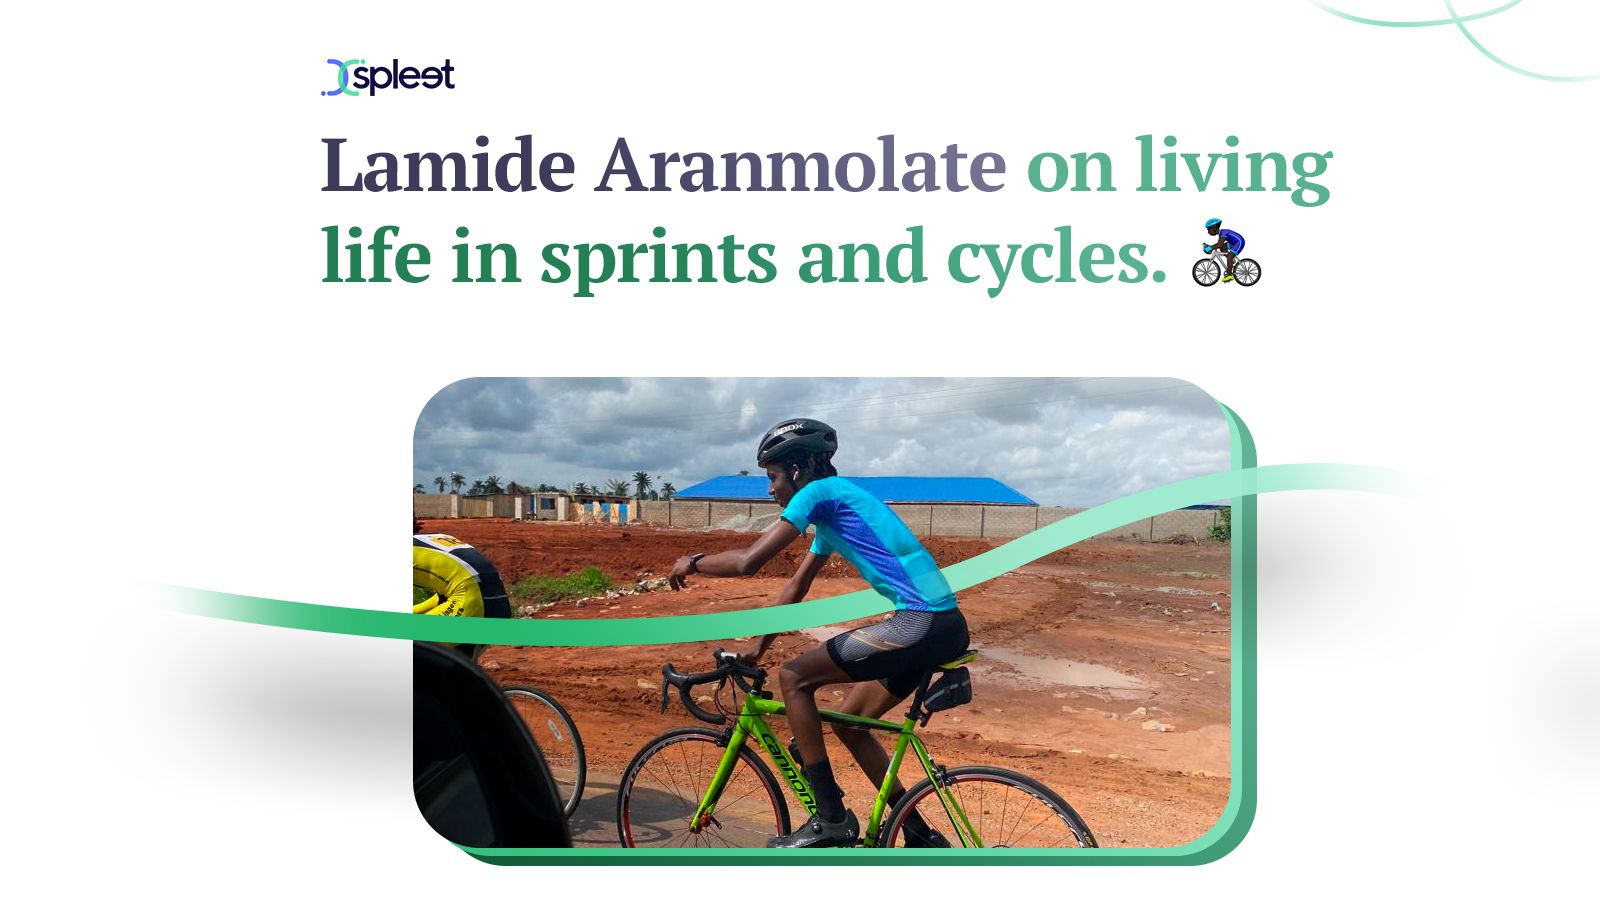 Lamide Aranmolate on living life in sprints and cycles.